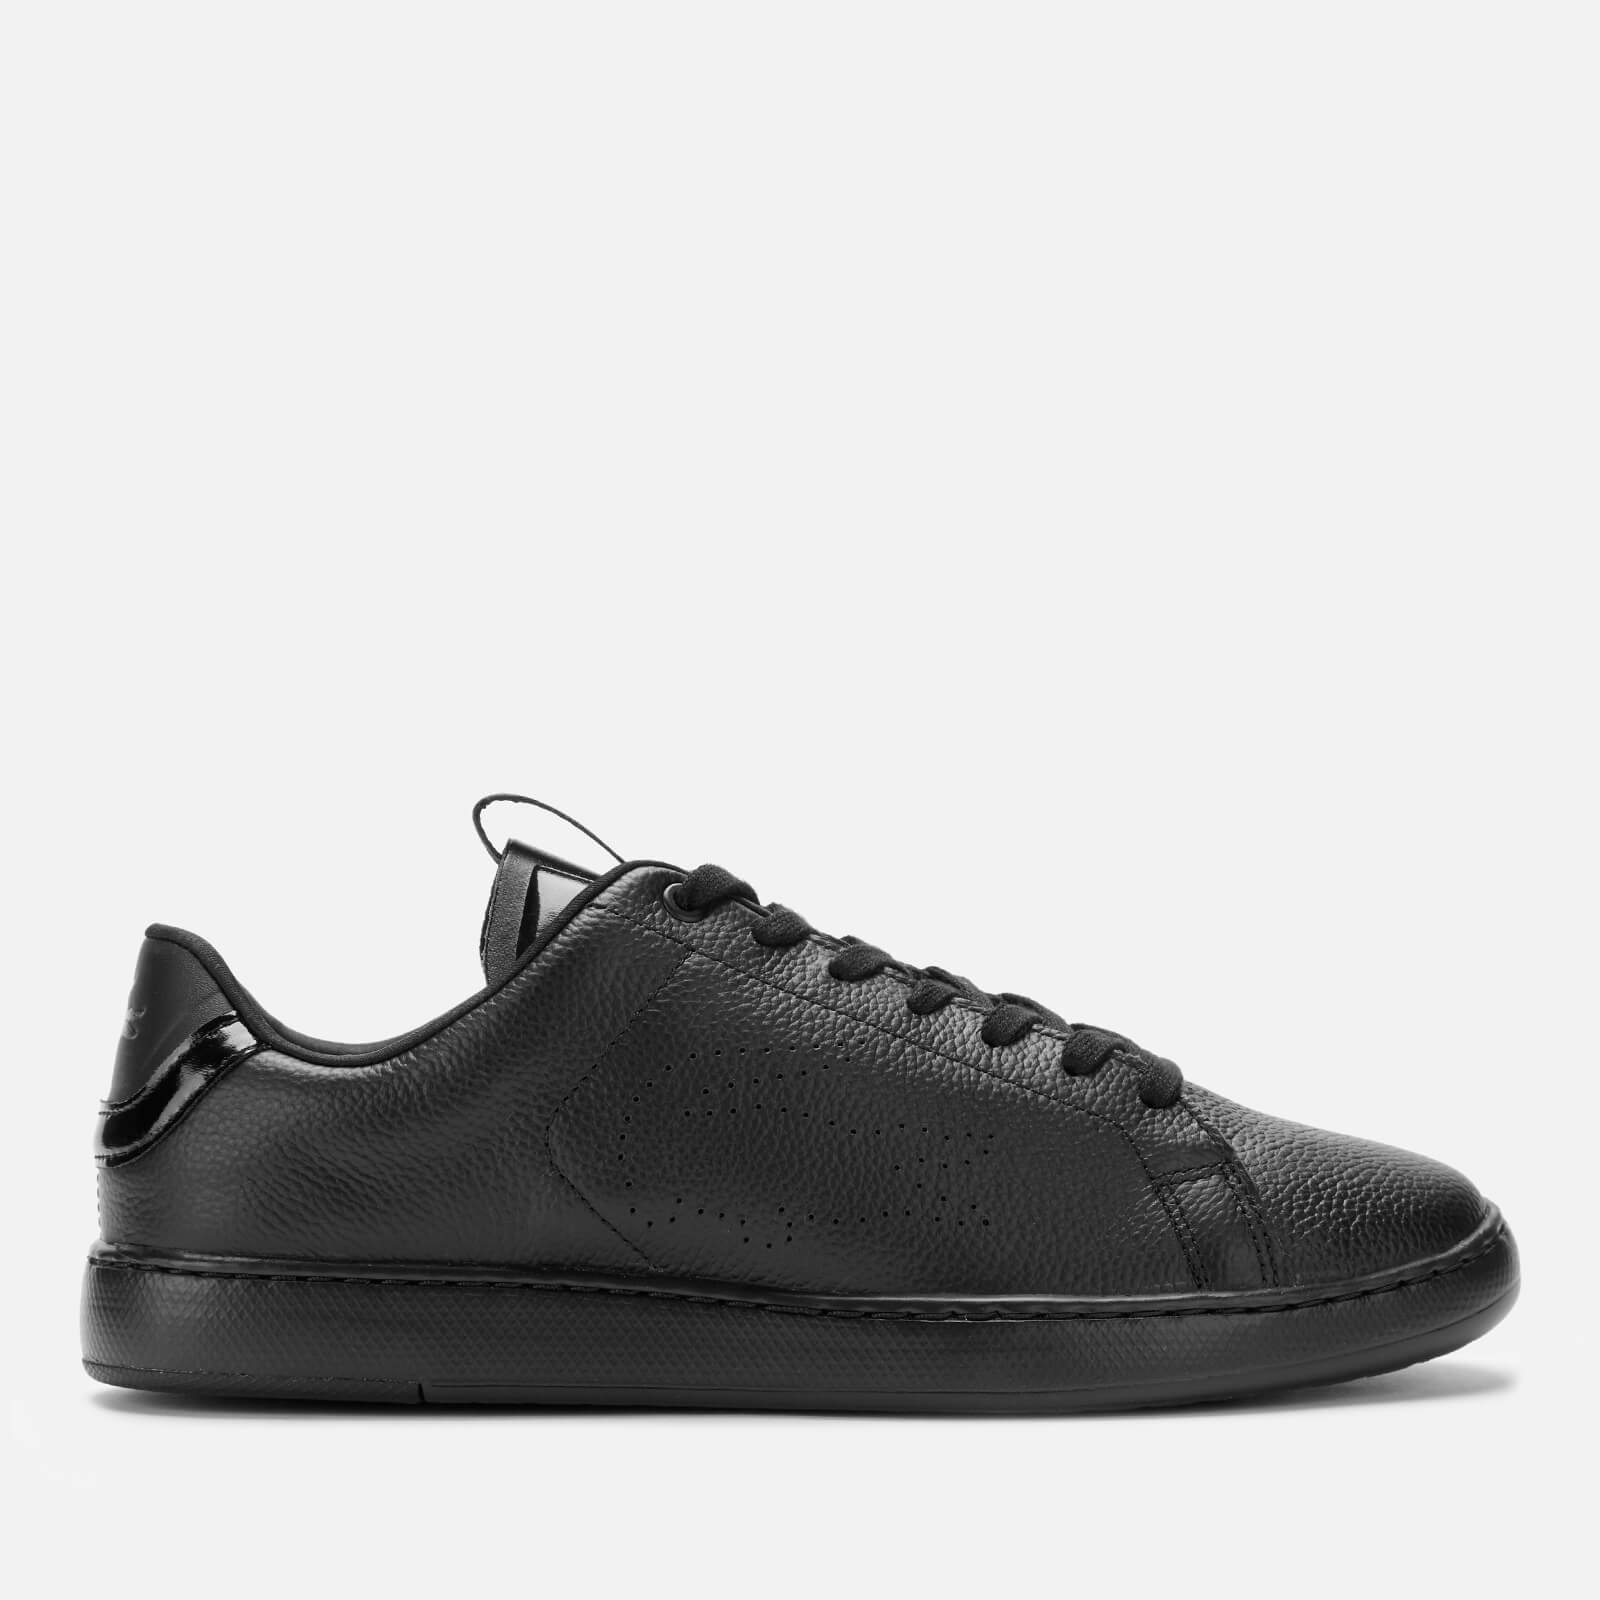 Lacoste Men's Carnaby Evo Light Leather 